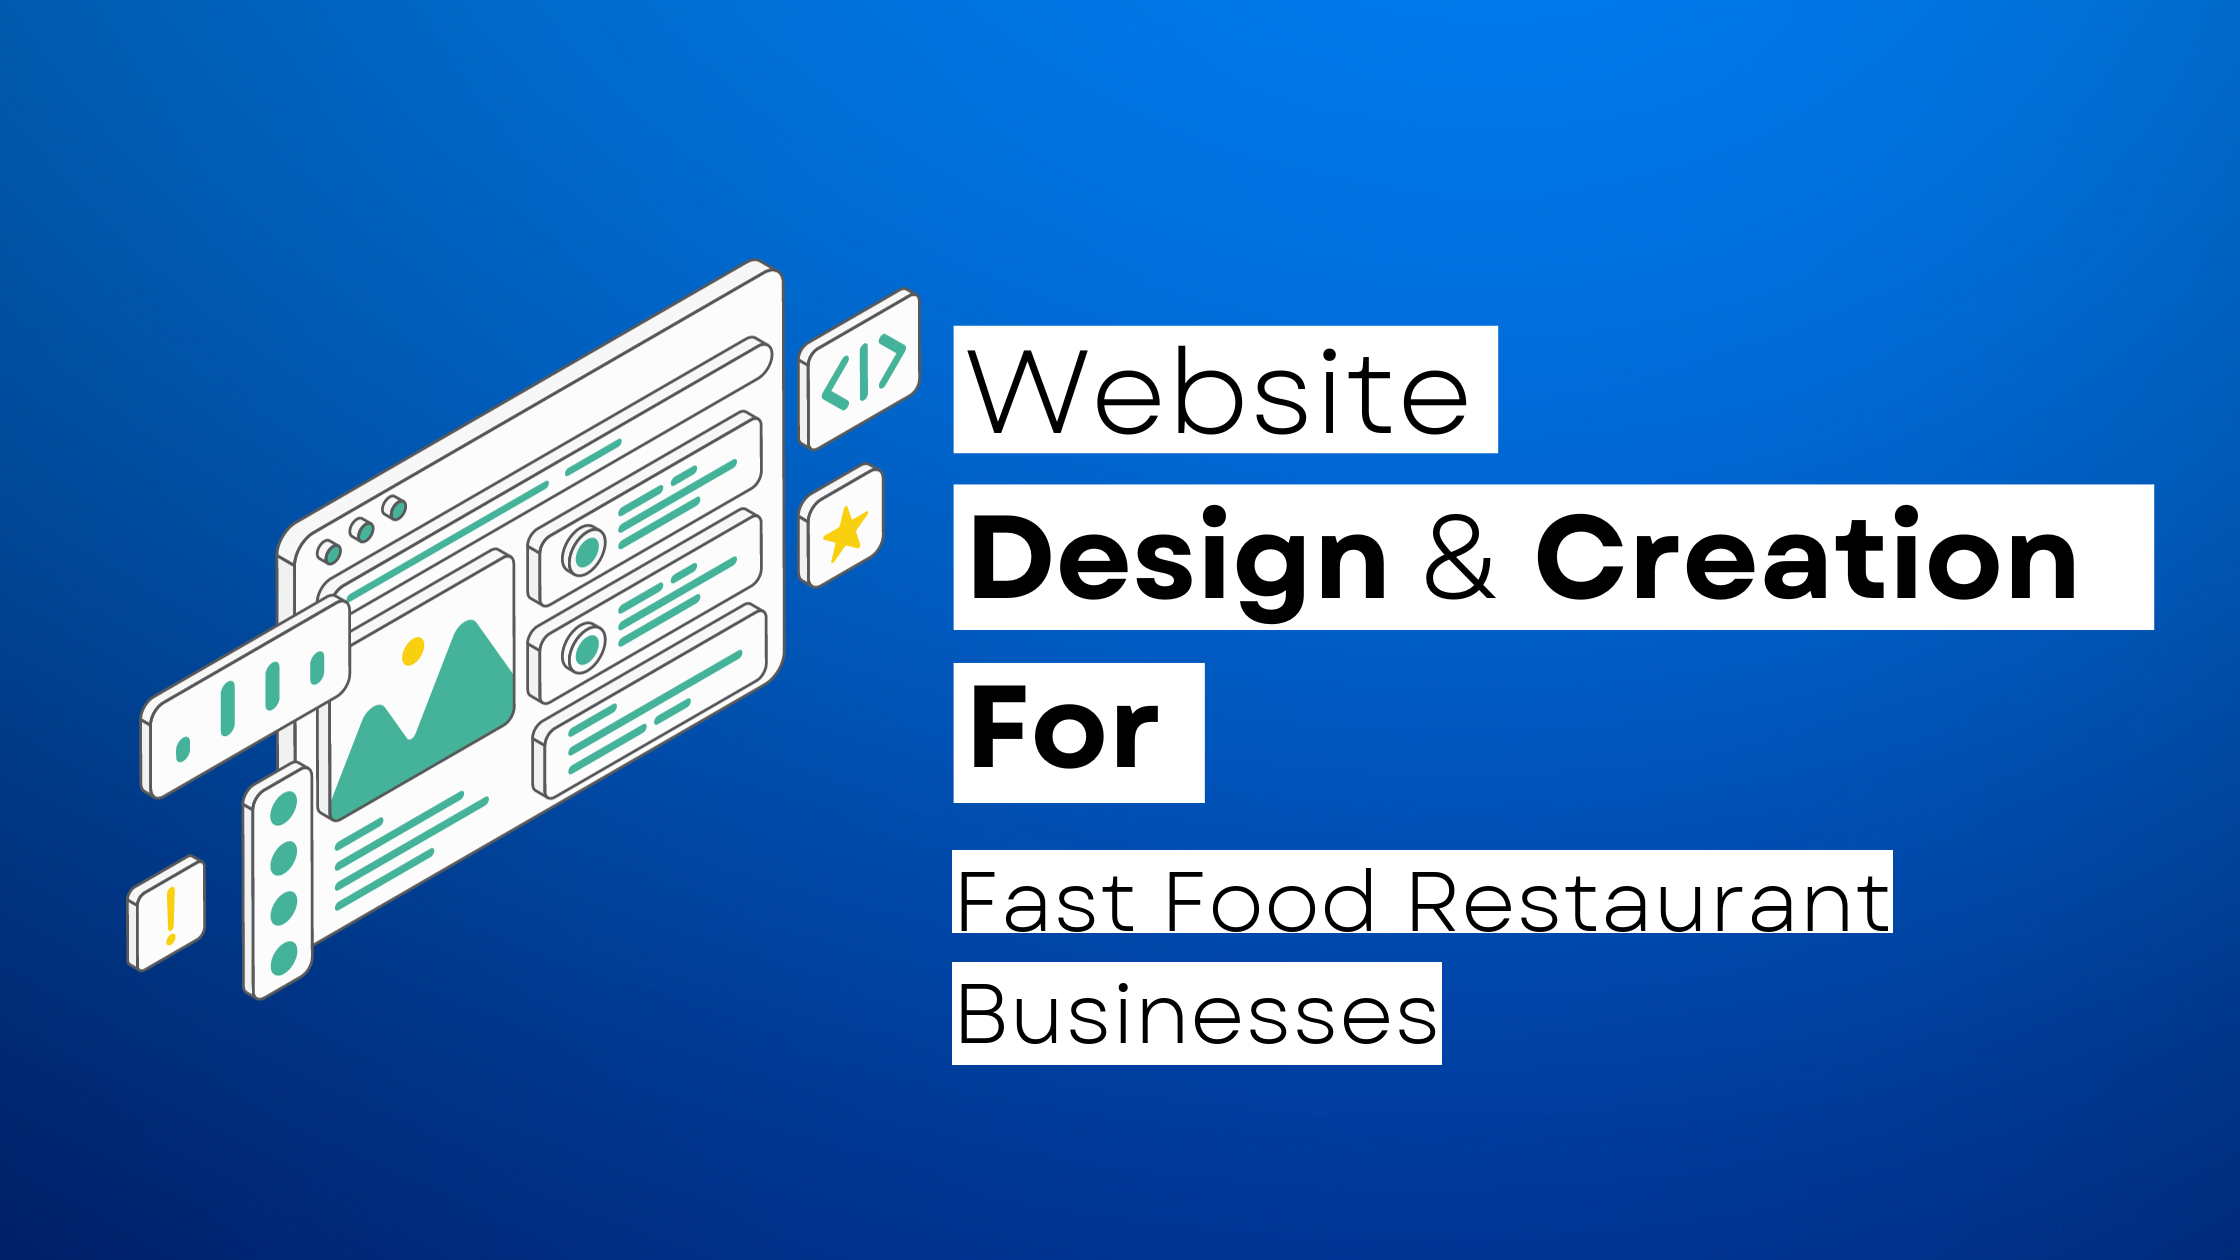 How to start a Fast Food Restaurant website